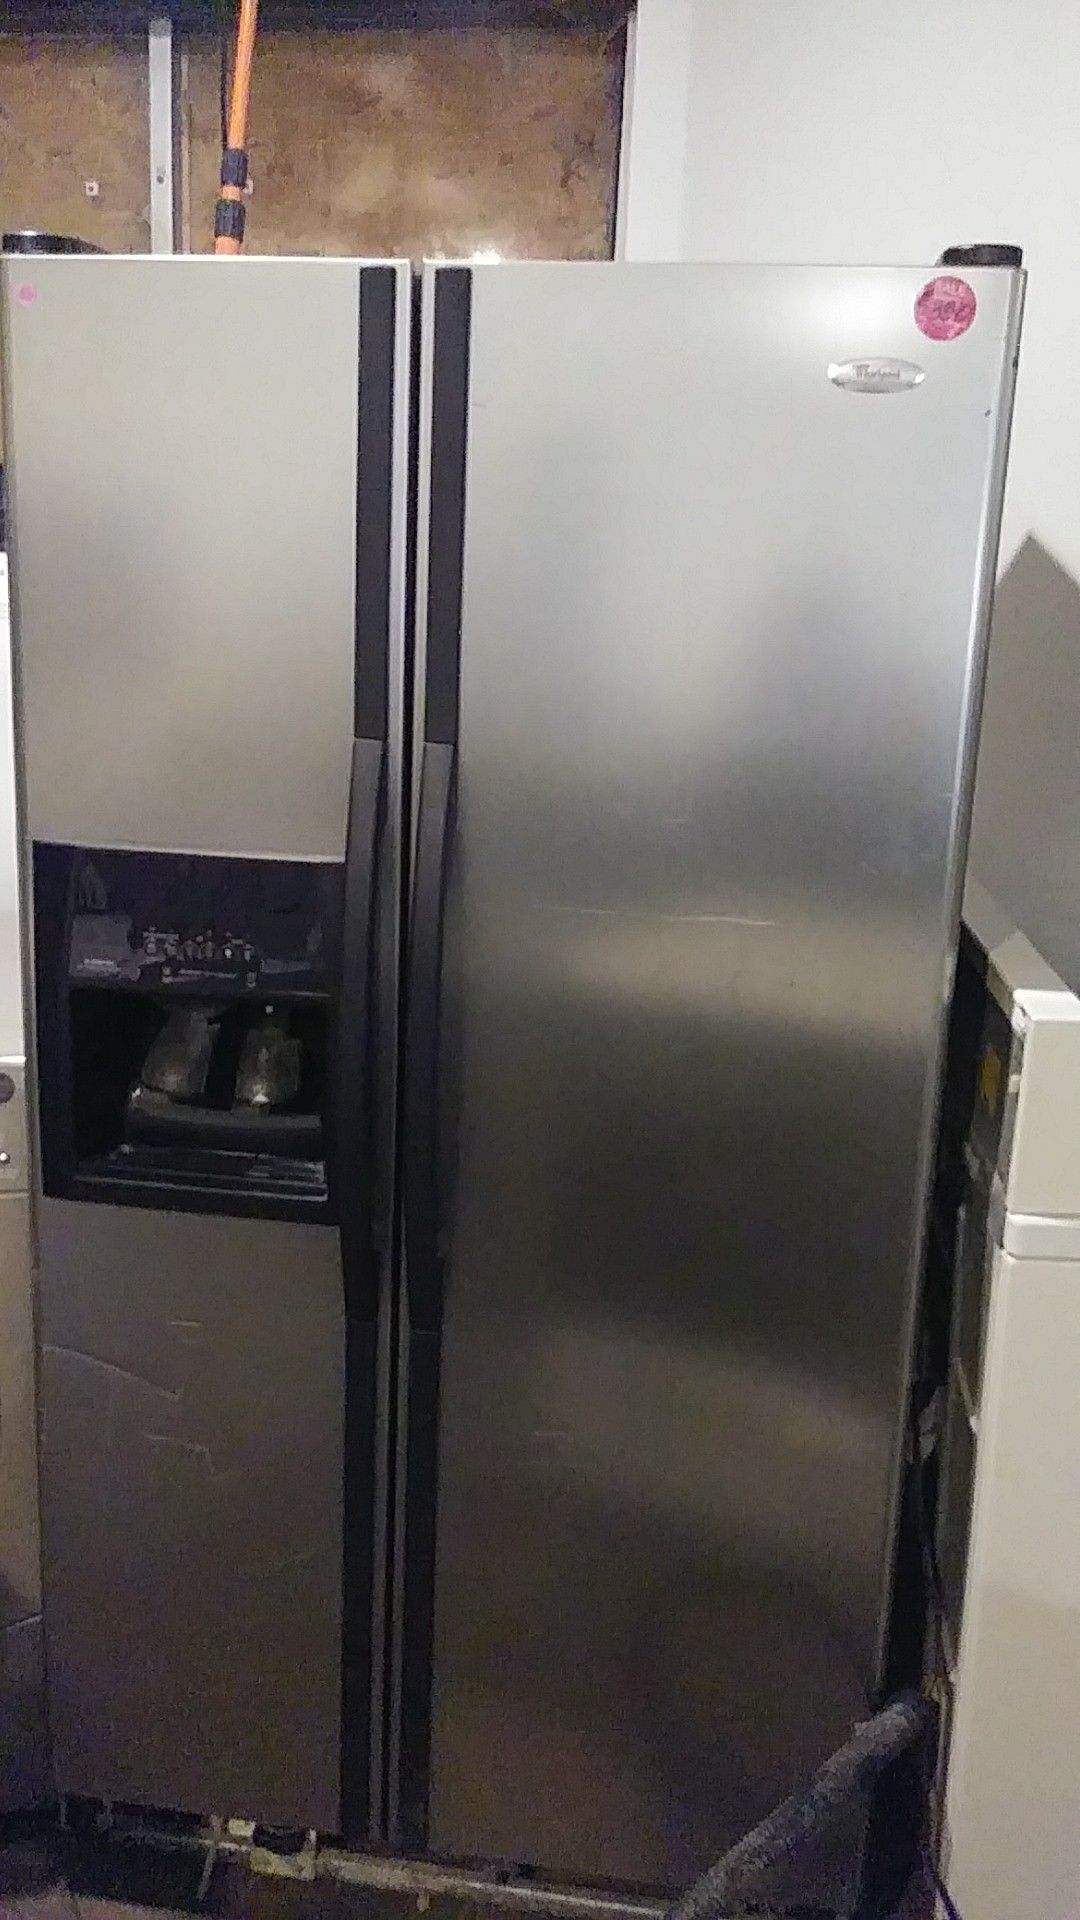 Whirlpool black and stainless steel side by side refrigerator